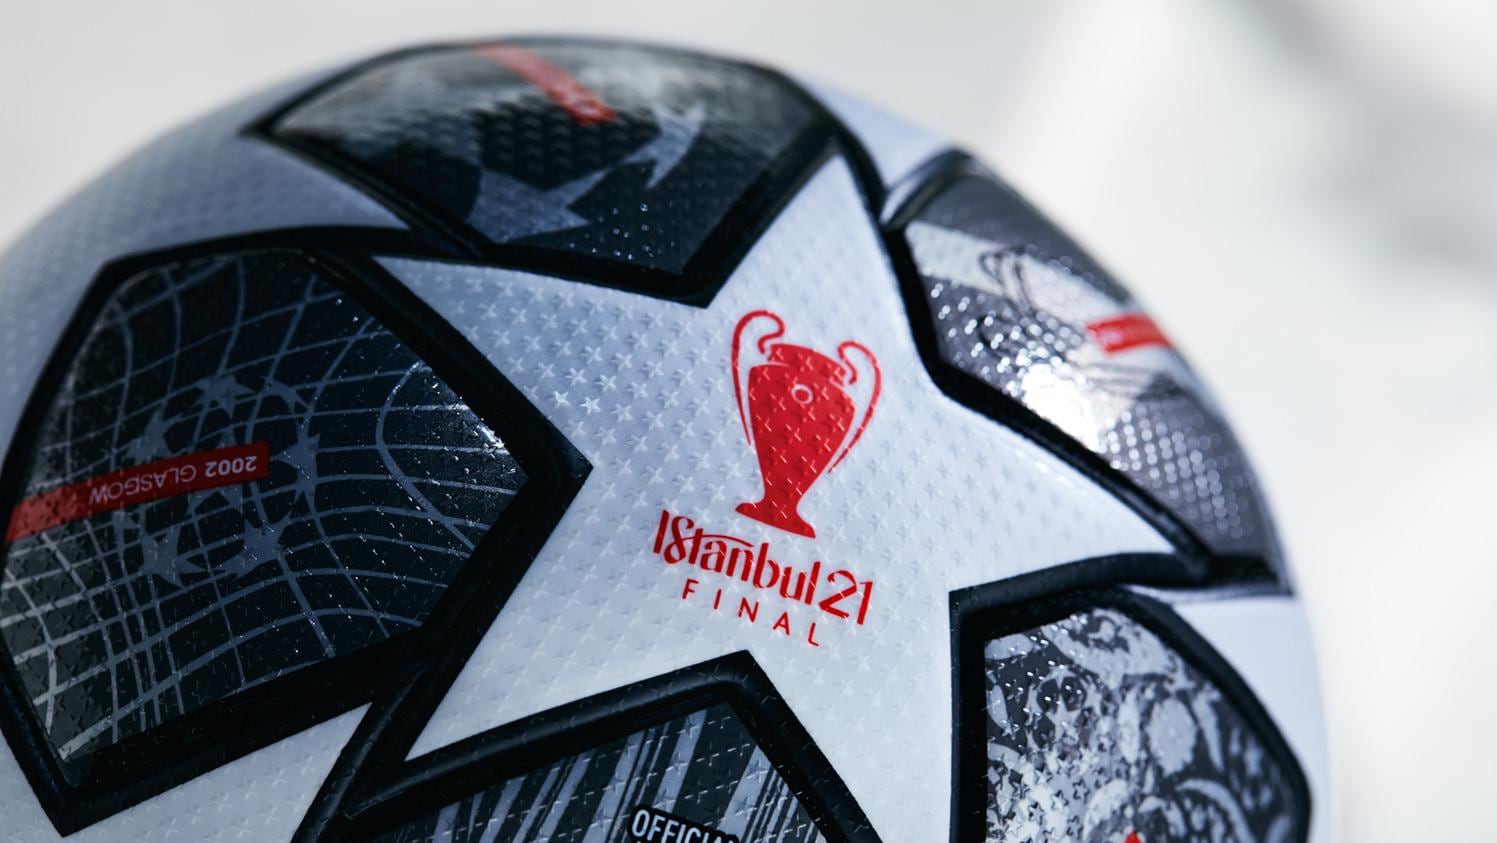 adidas reveals the official match ball for 2021 UEFA